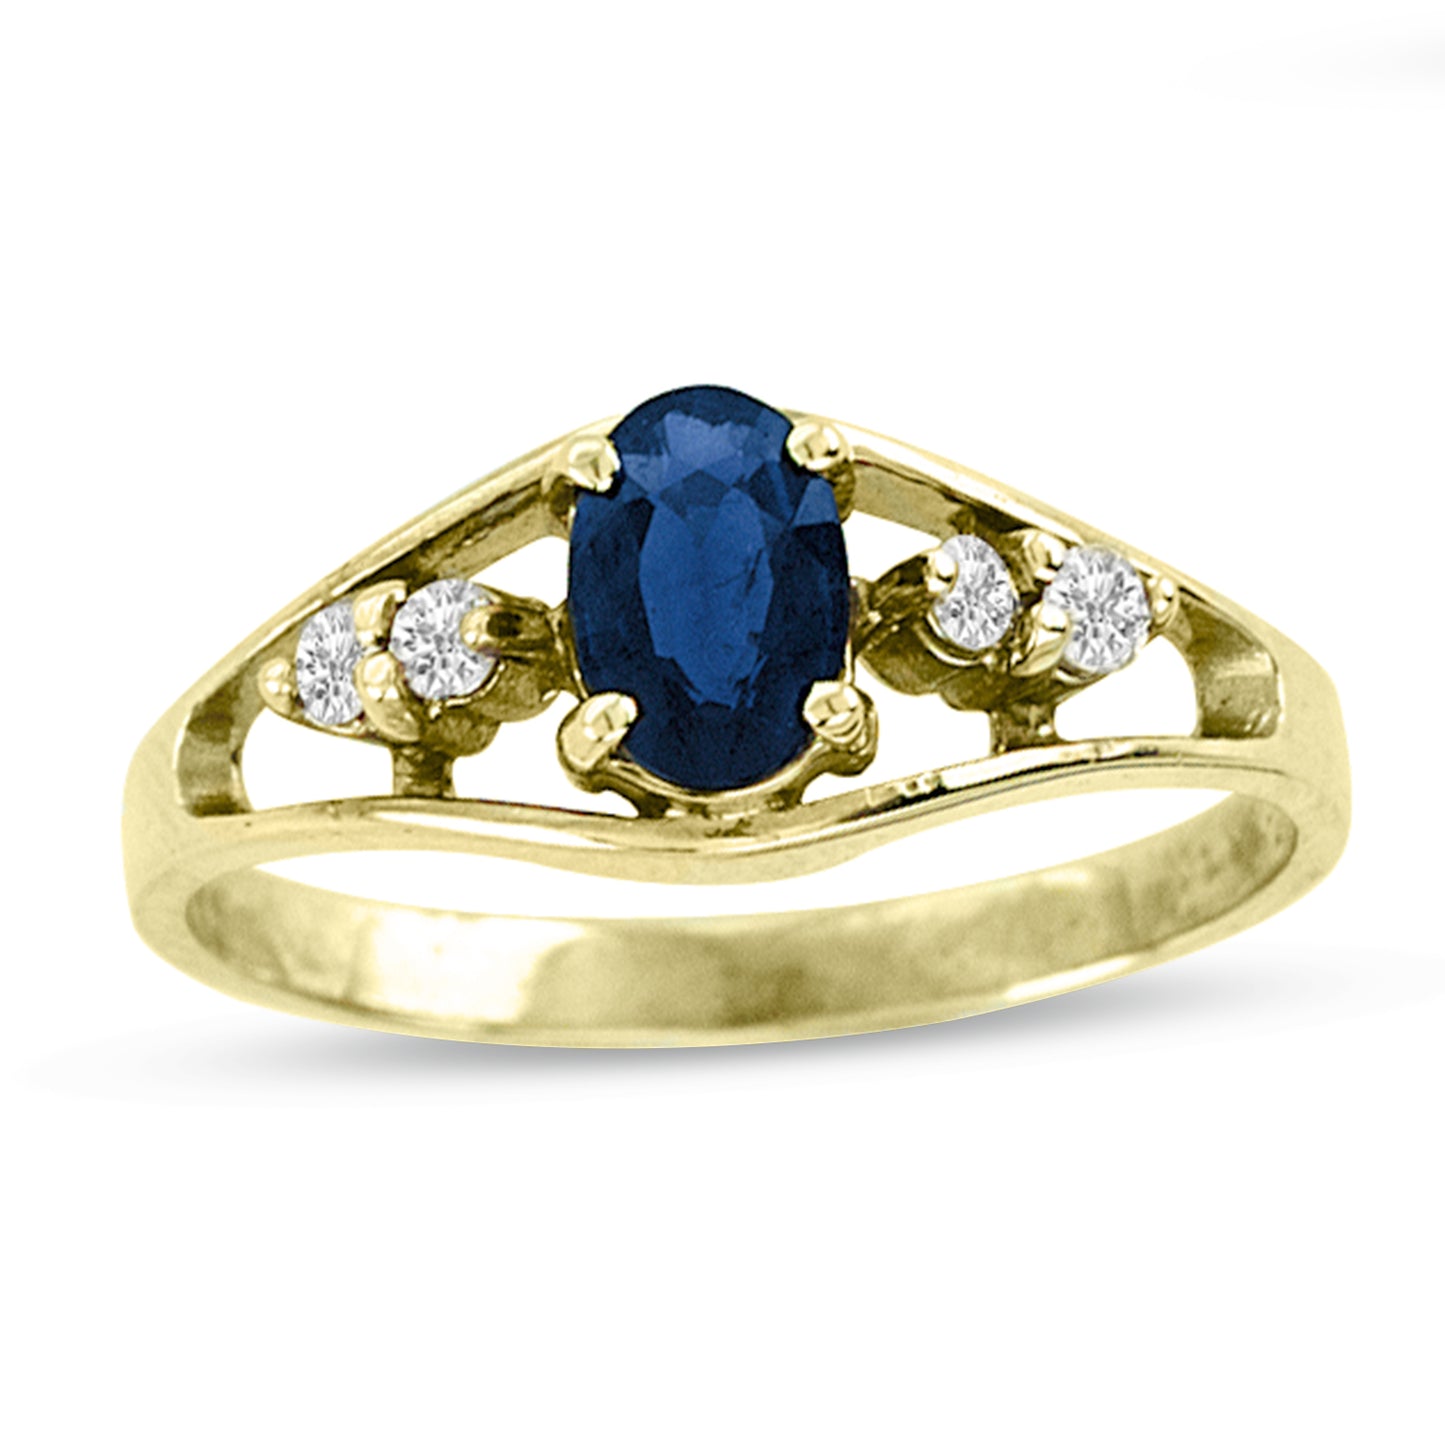 3/5ct Blue Sapphire & Diamond Engagement Ring in 14k Yellow Gold